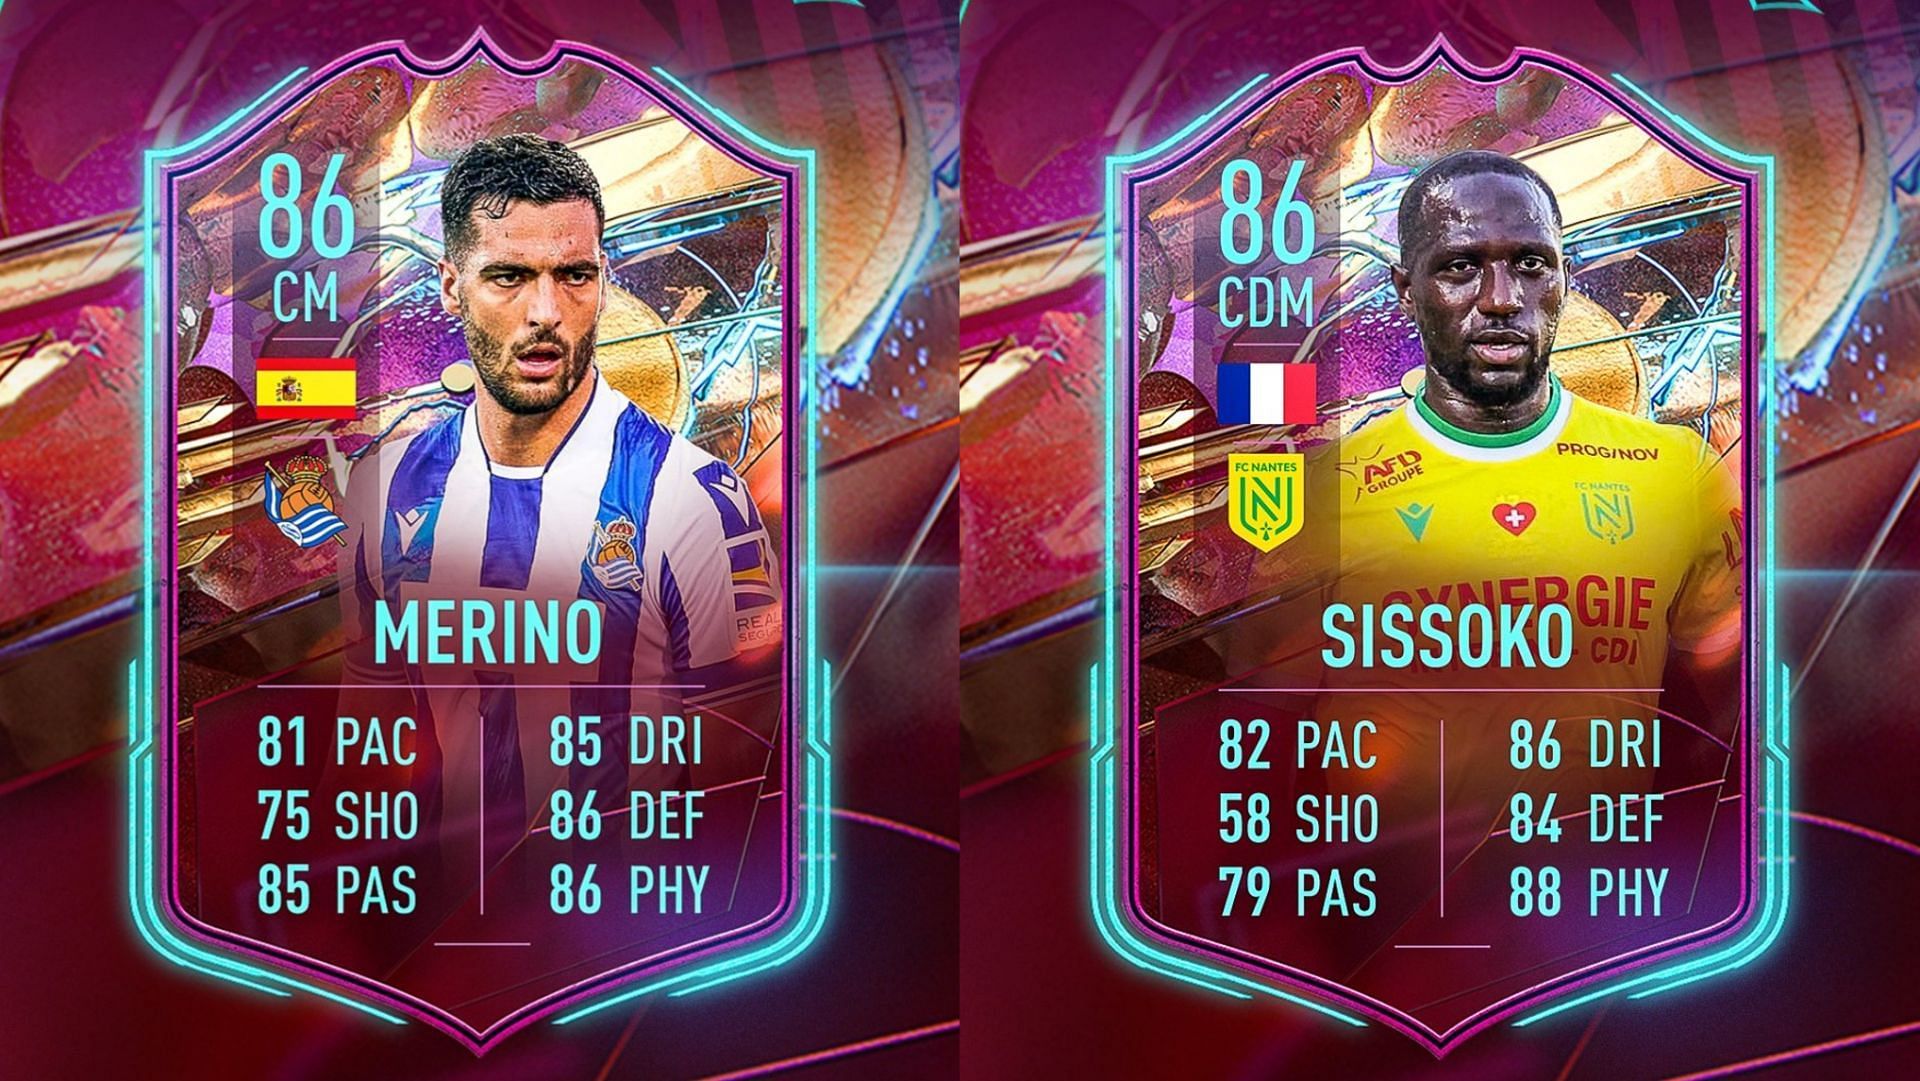 A new set of cards will appear as part of Team 2 (Images via Twitter/FUT Sheriff)